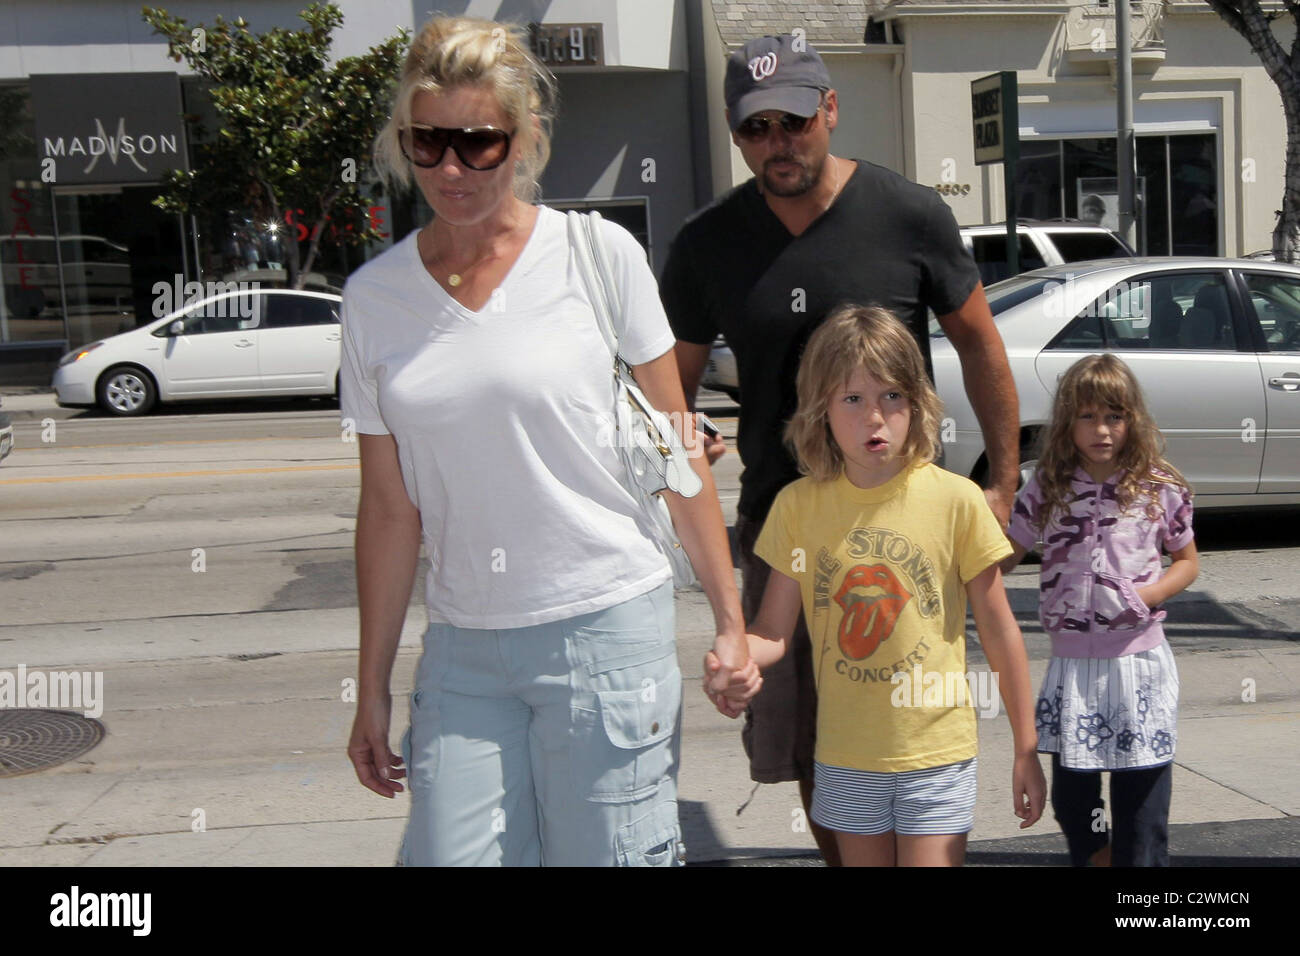 Tim McGraw and Faith Hill leaving Cafe Med restaurant at Sunset Plaza in West Hollywood with their children Los Angeles, Stock Photo